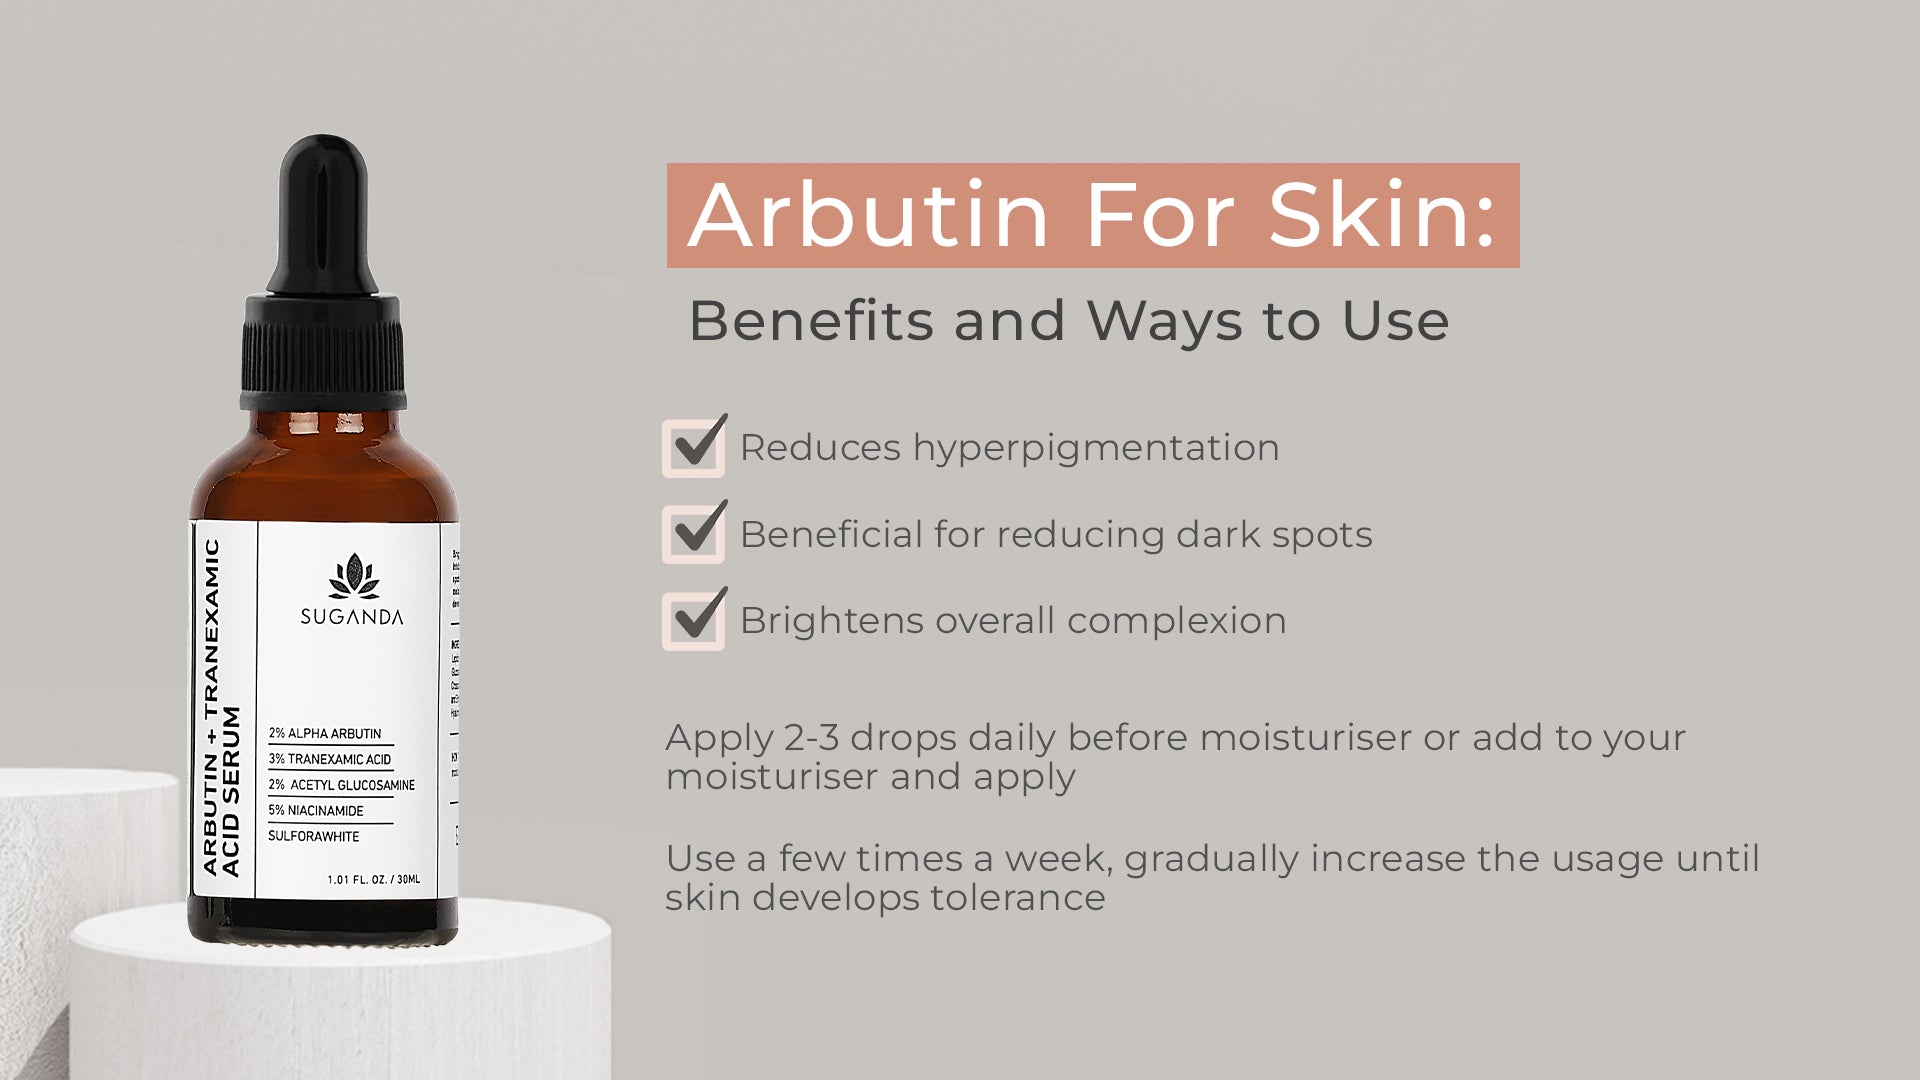 Arbutin For Skin: Benefits and Ways to Use